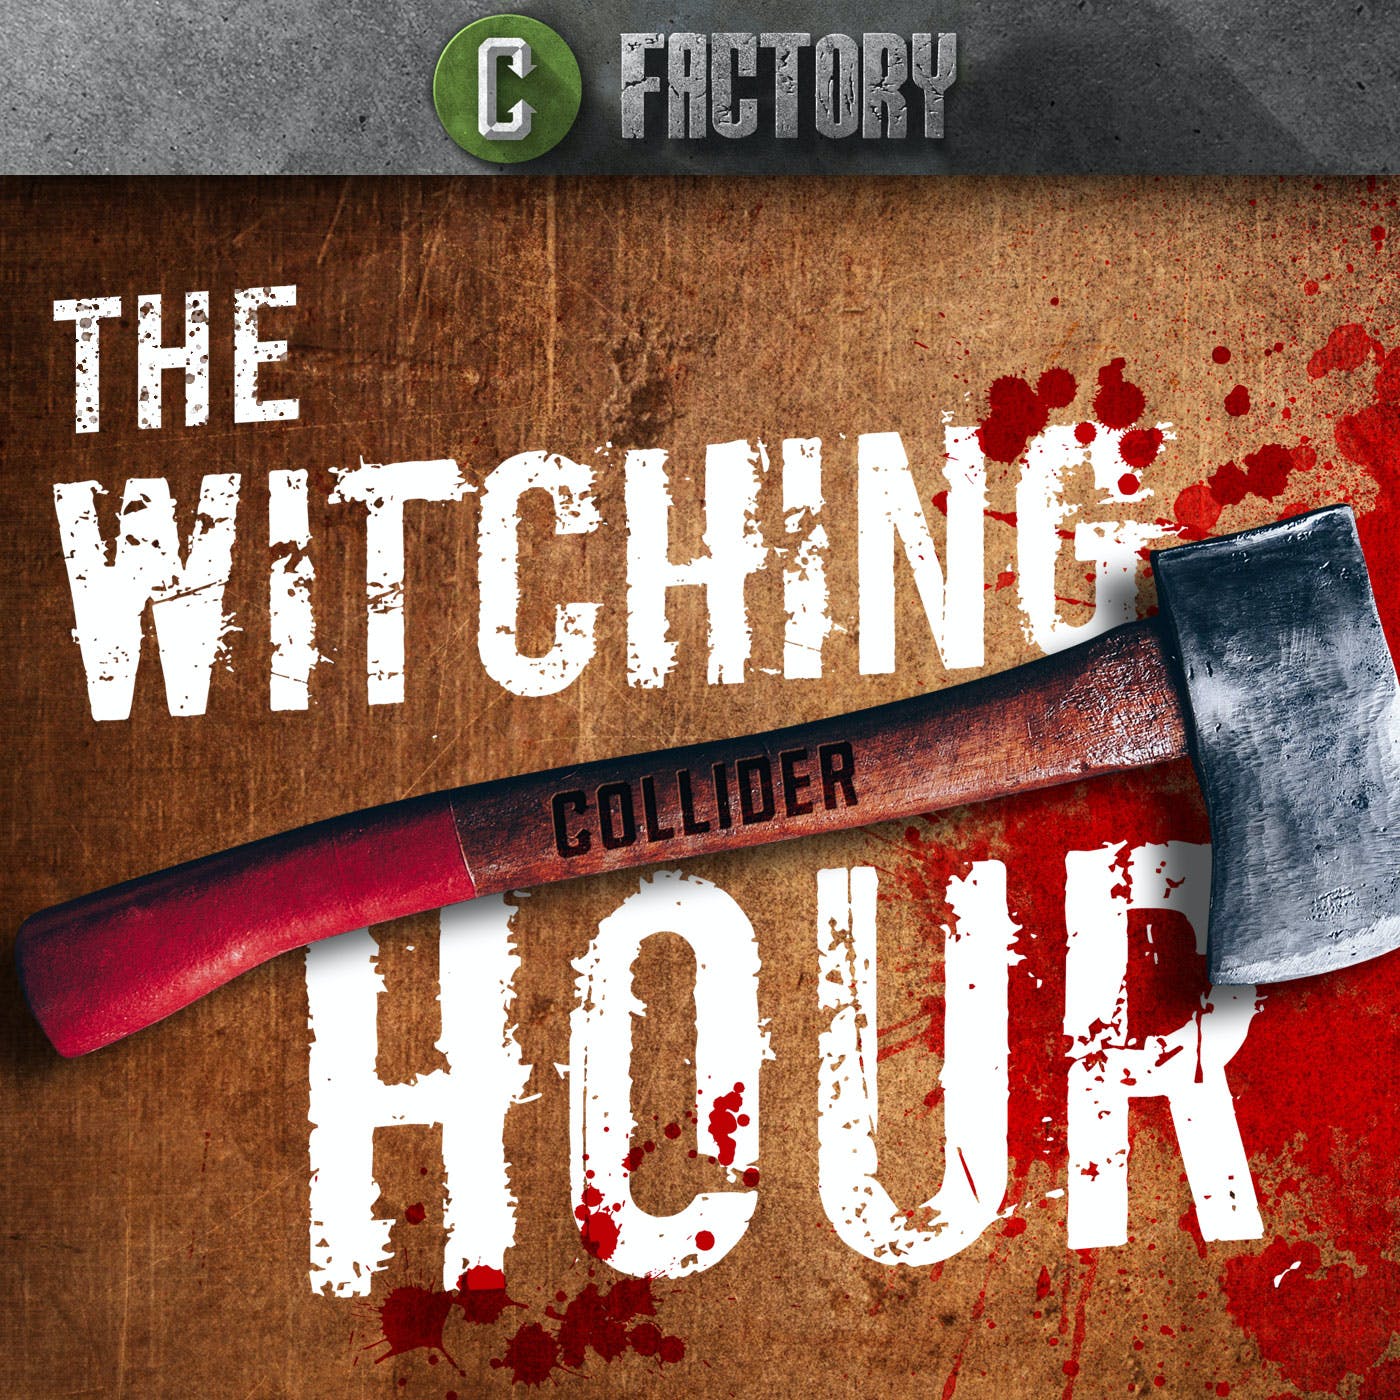 Lovecraft Country Review and Fantasia 2020 Preview - The Witching Hour